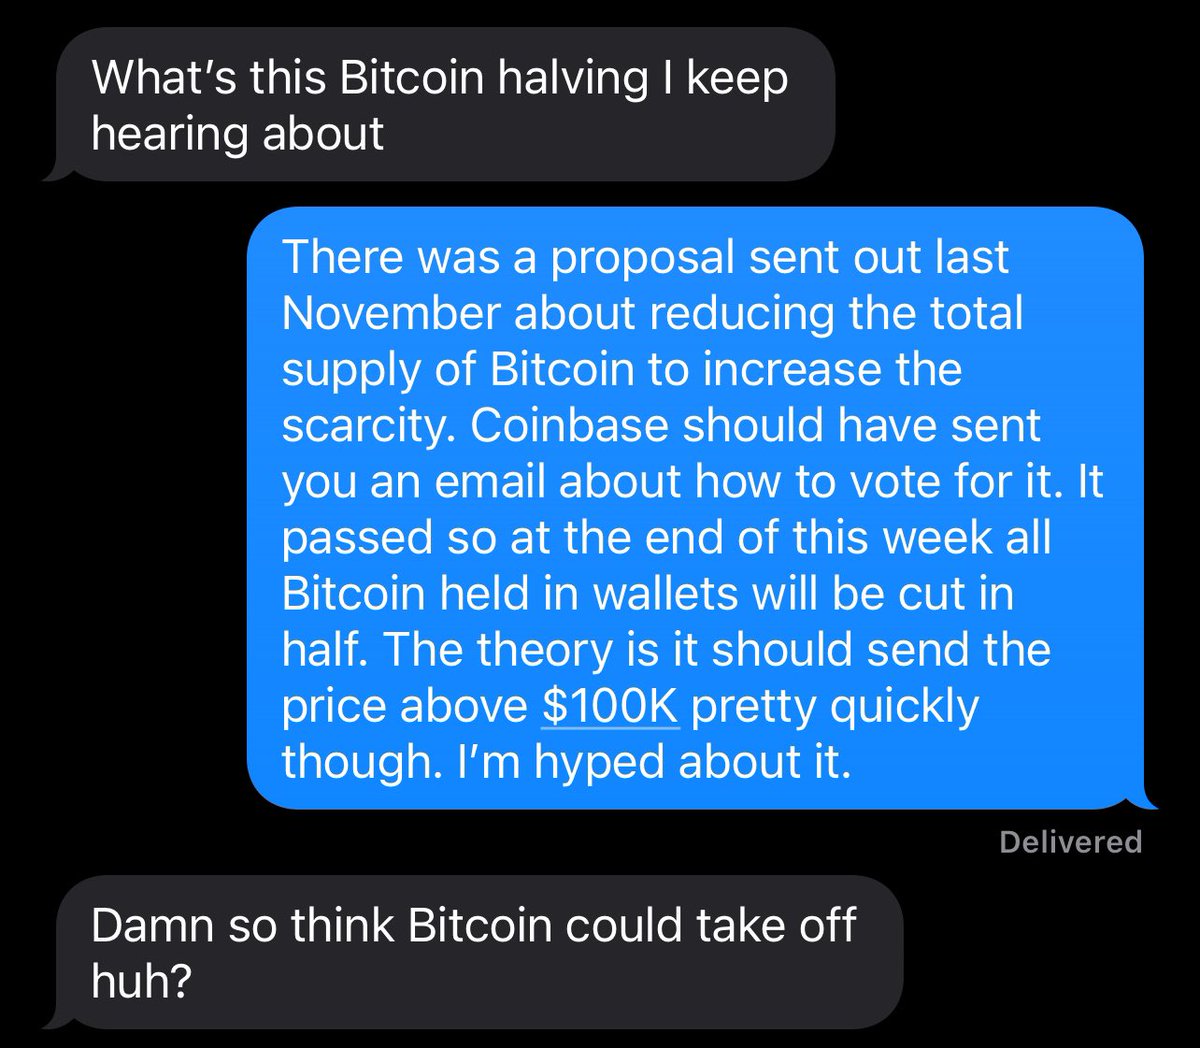 Here’s a brief explanation of the Bitcoin halving I gave my friend for anyone wondering what it’s all about: